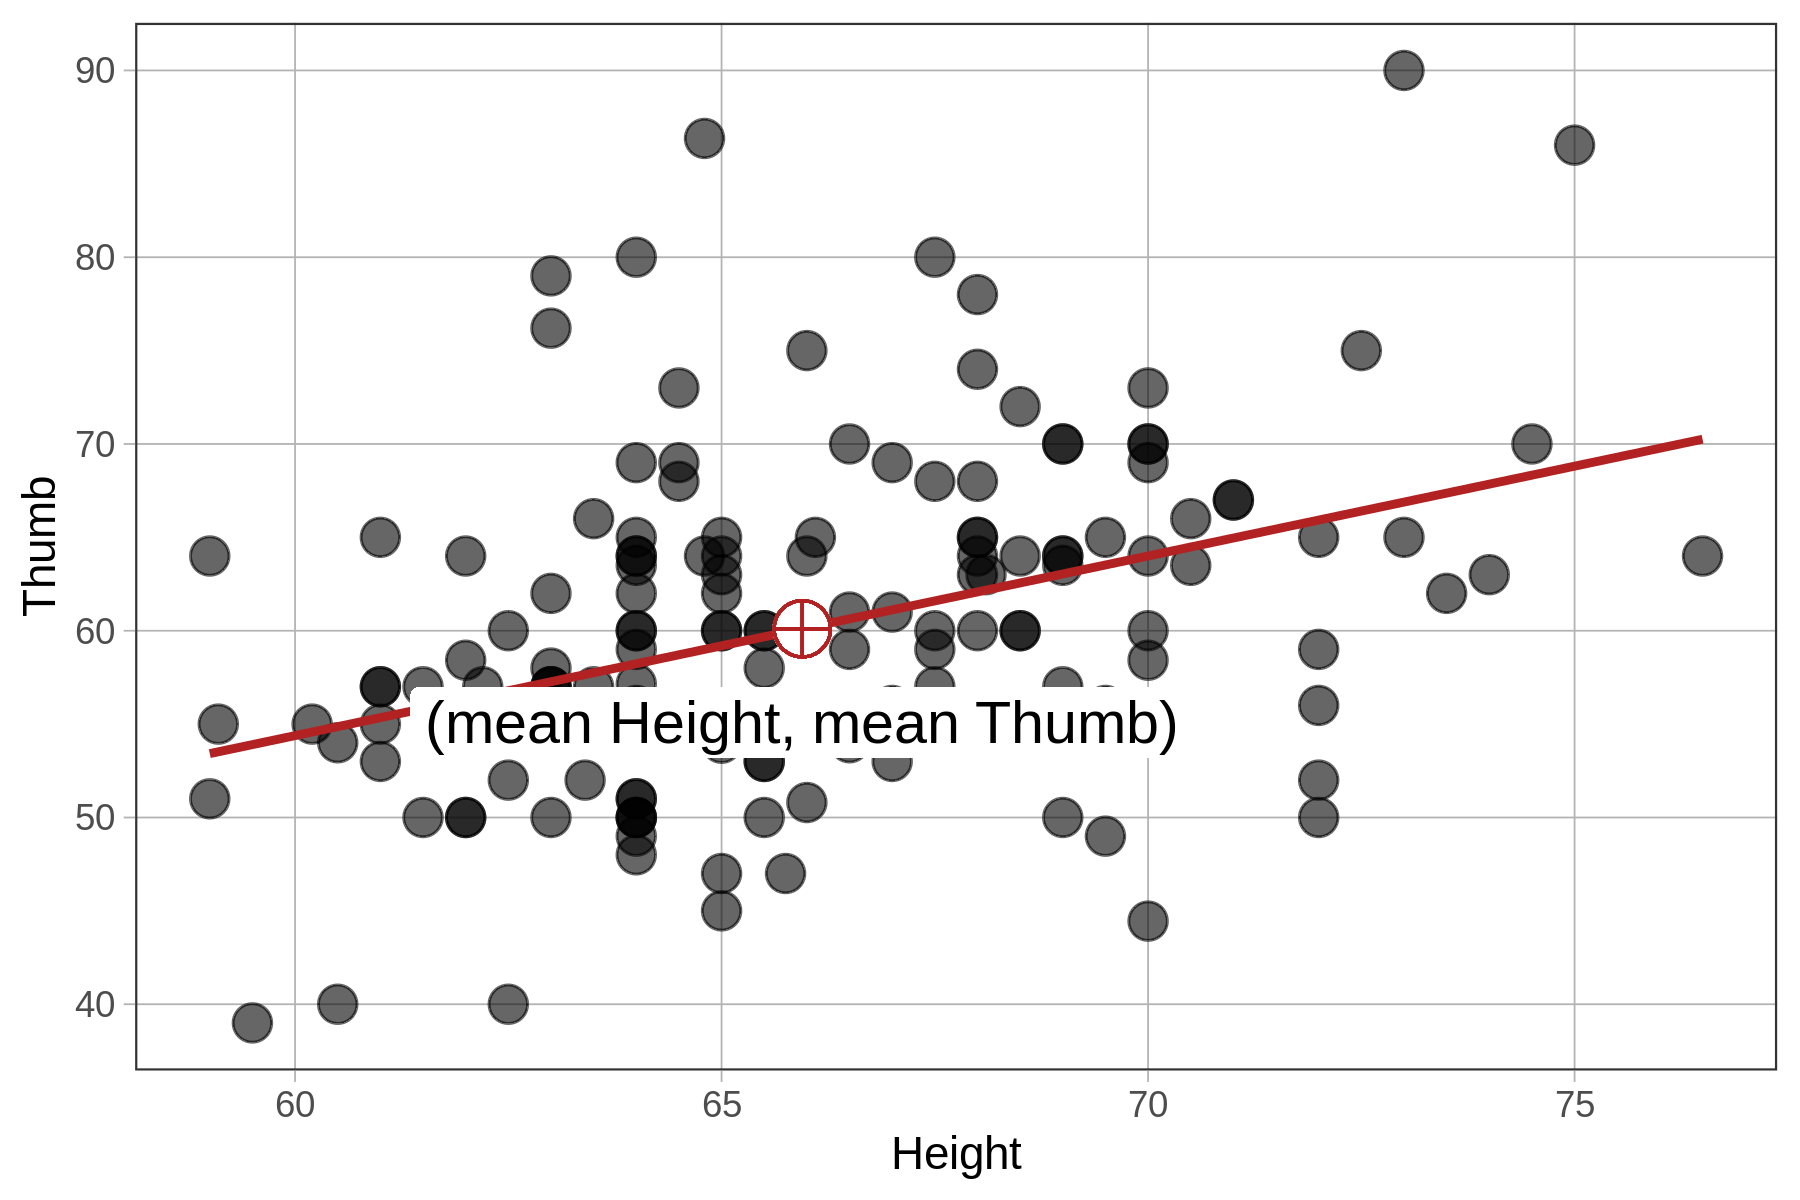 A scatterplot of the distribution of Thumb by Height overlaid with regression line. The point of means (mean height, mean thumb length) is shown on the regression line.